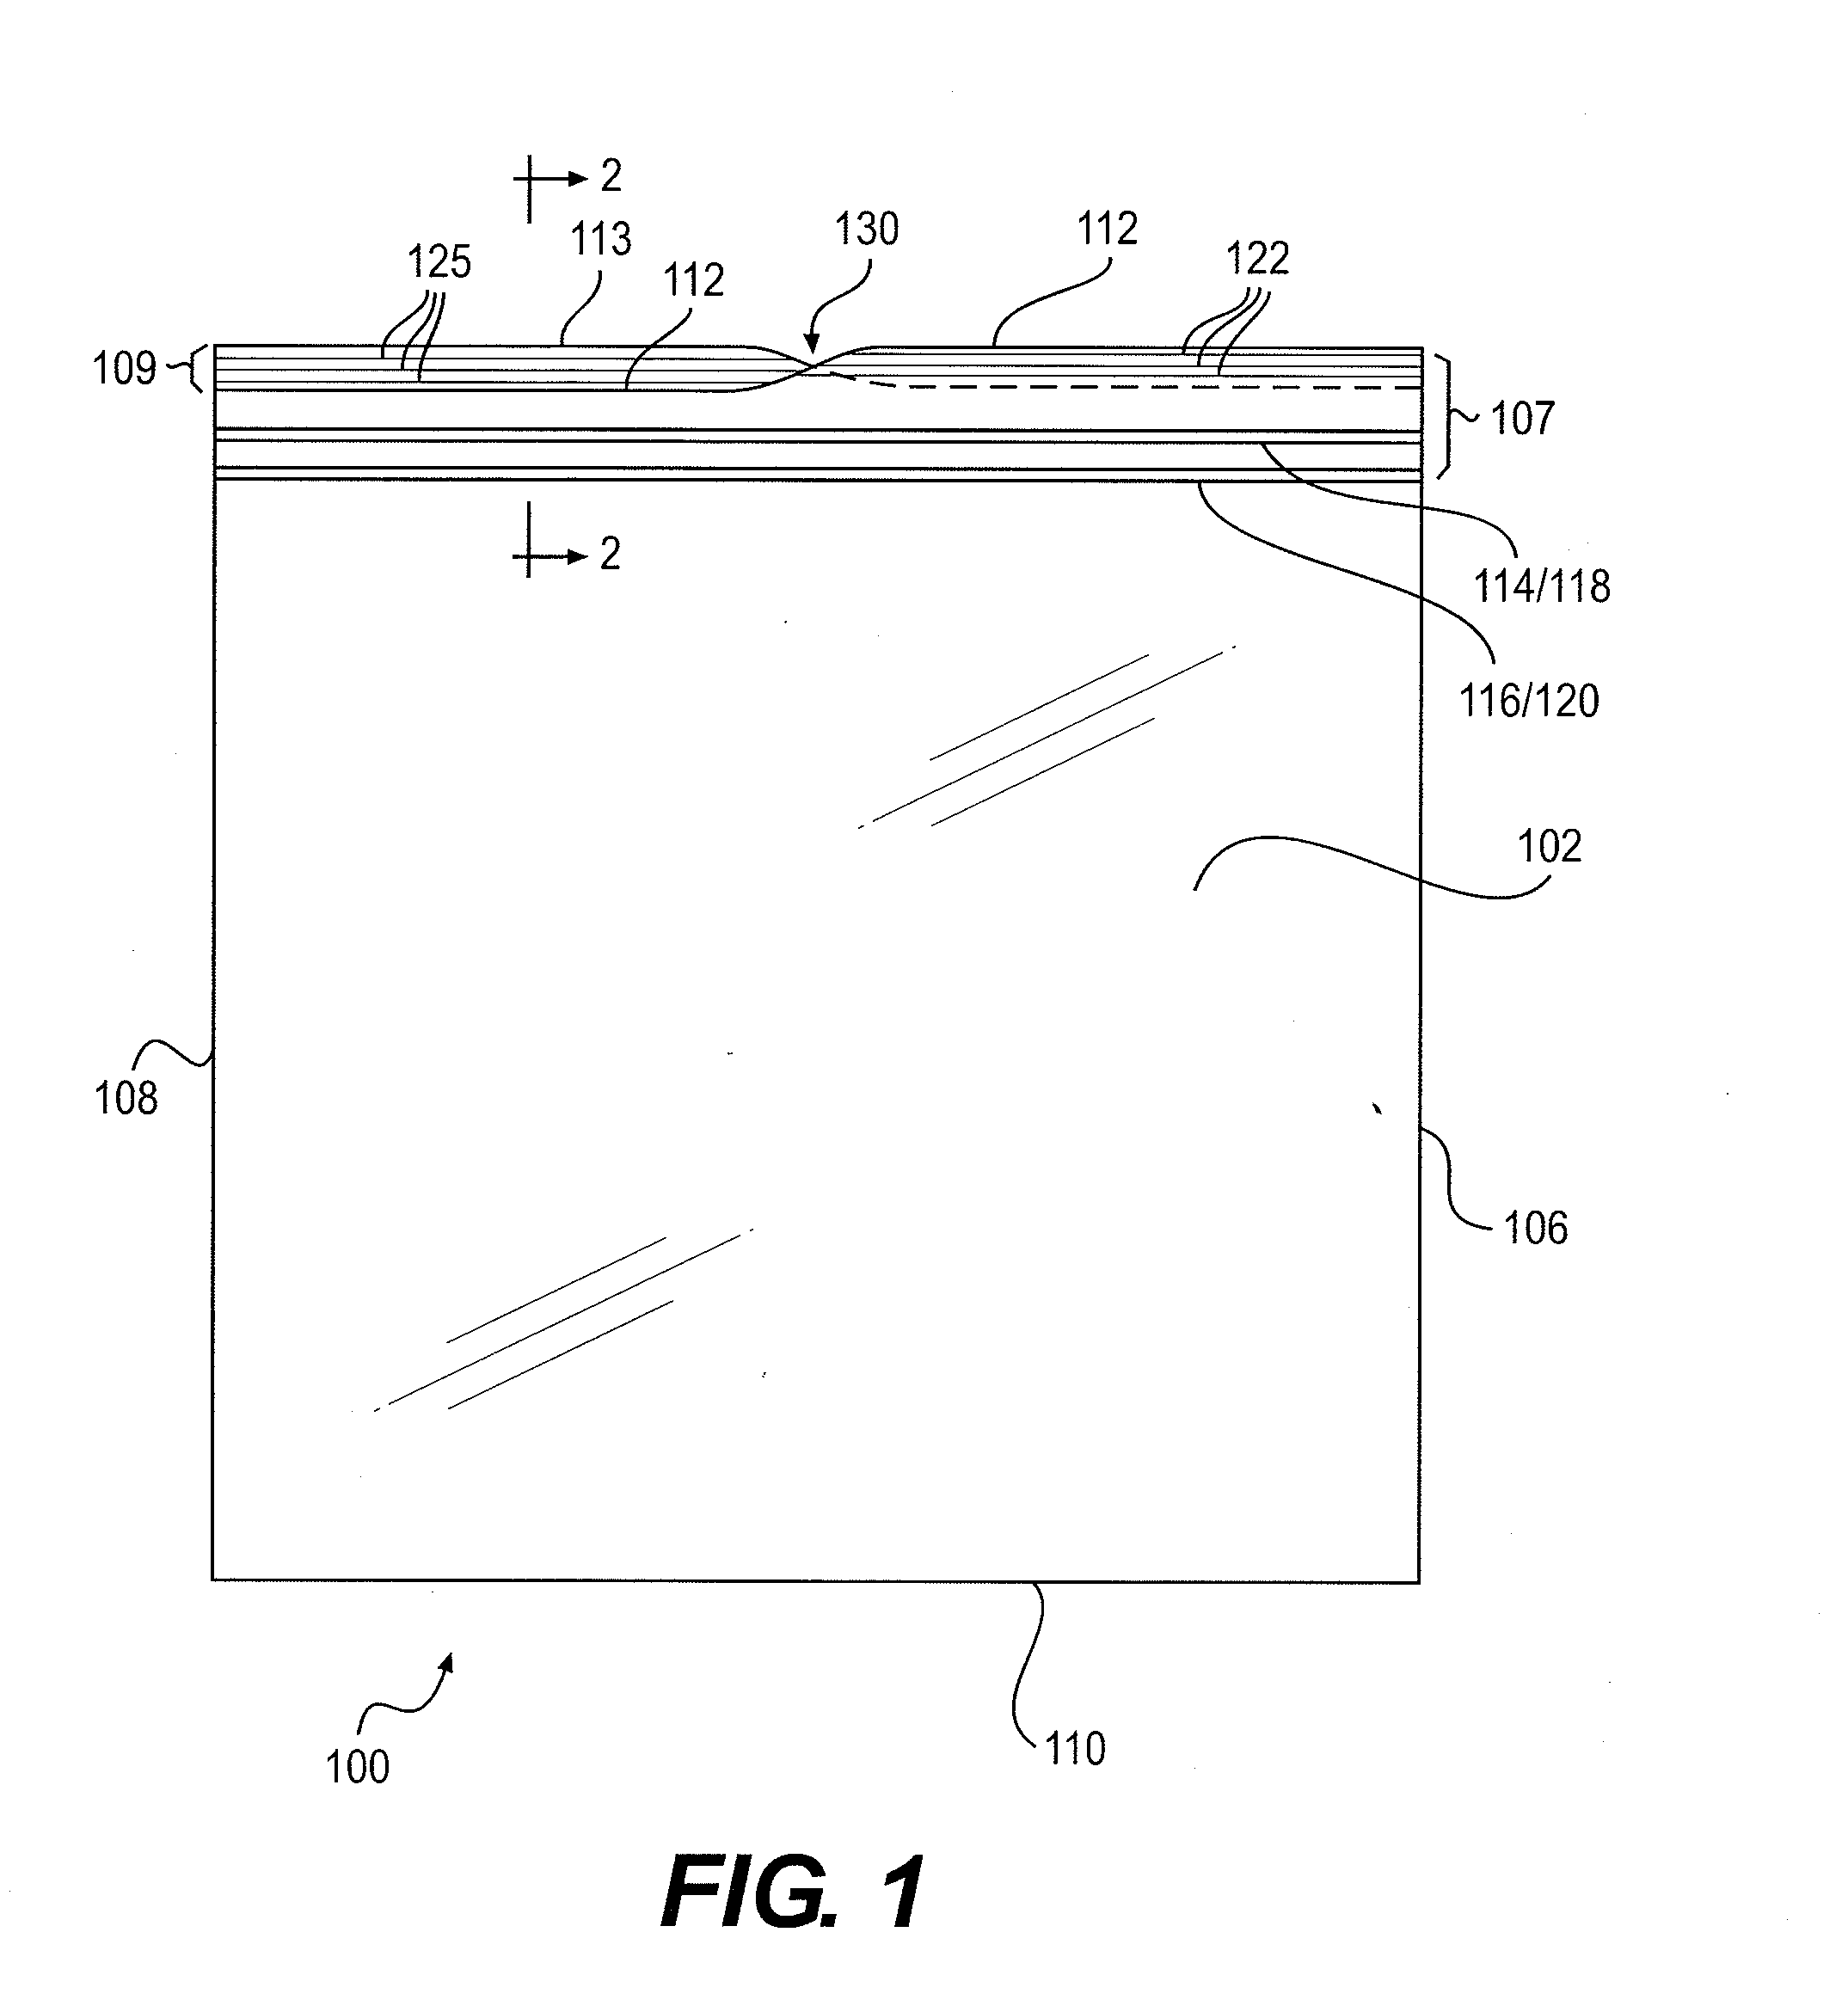 Storage Bag With Textured Area On Lips To Facilitate Closing Process